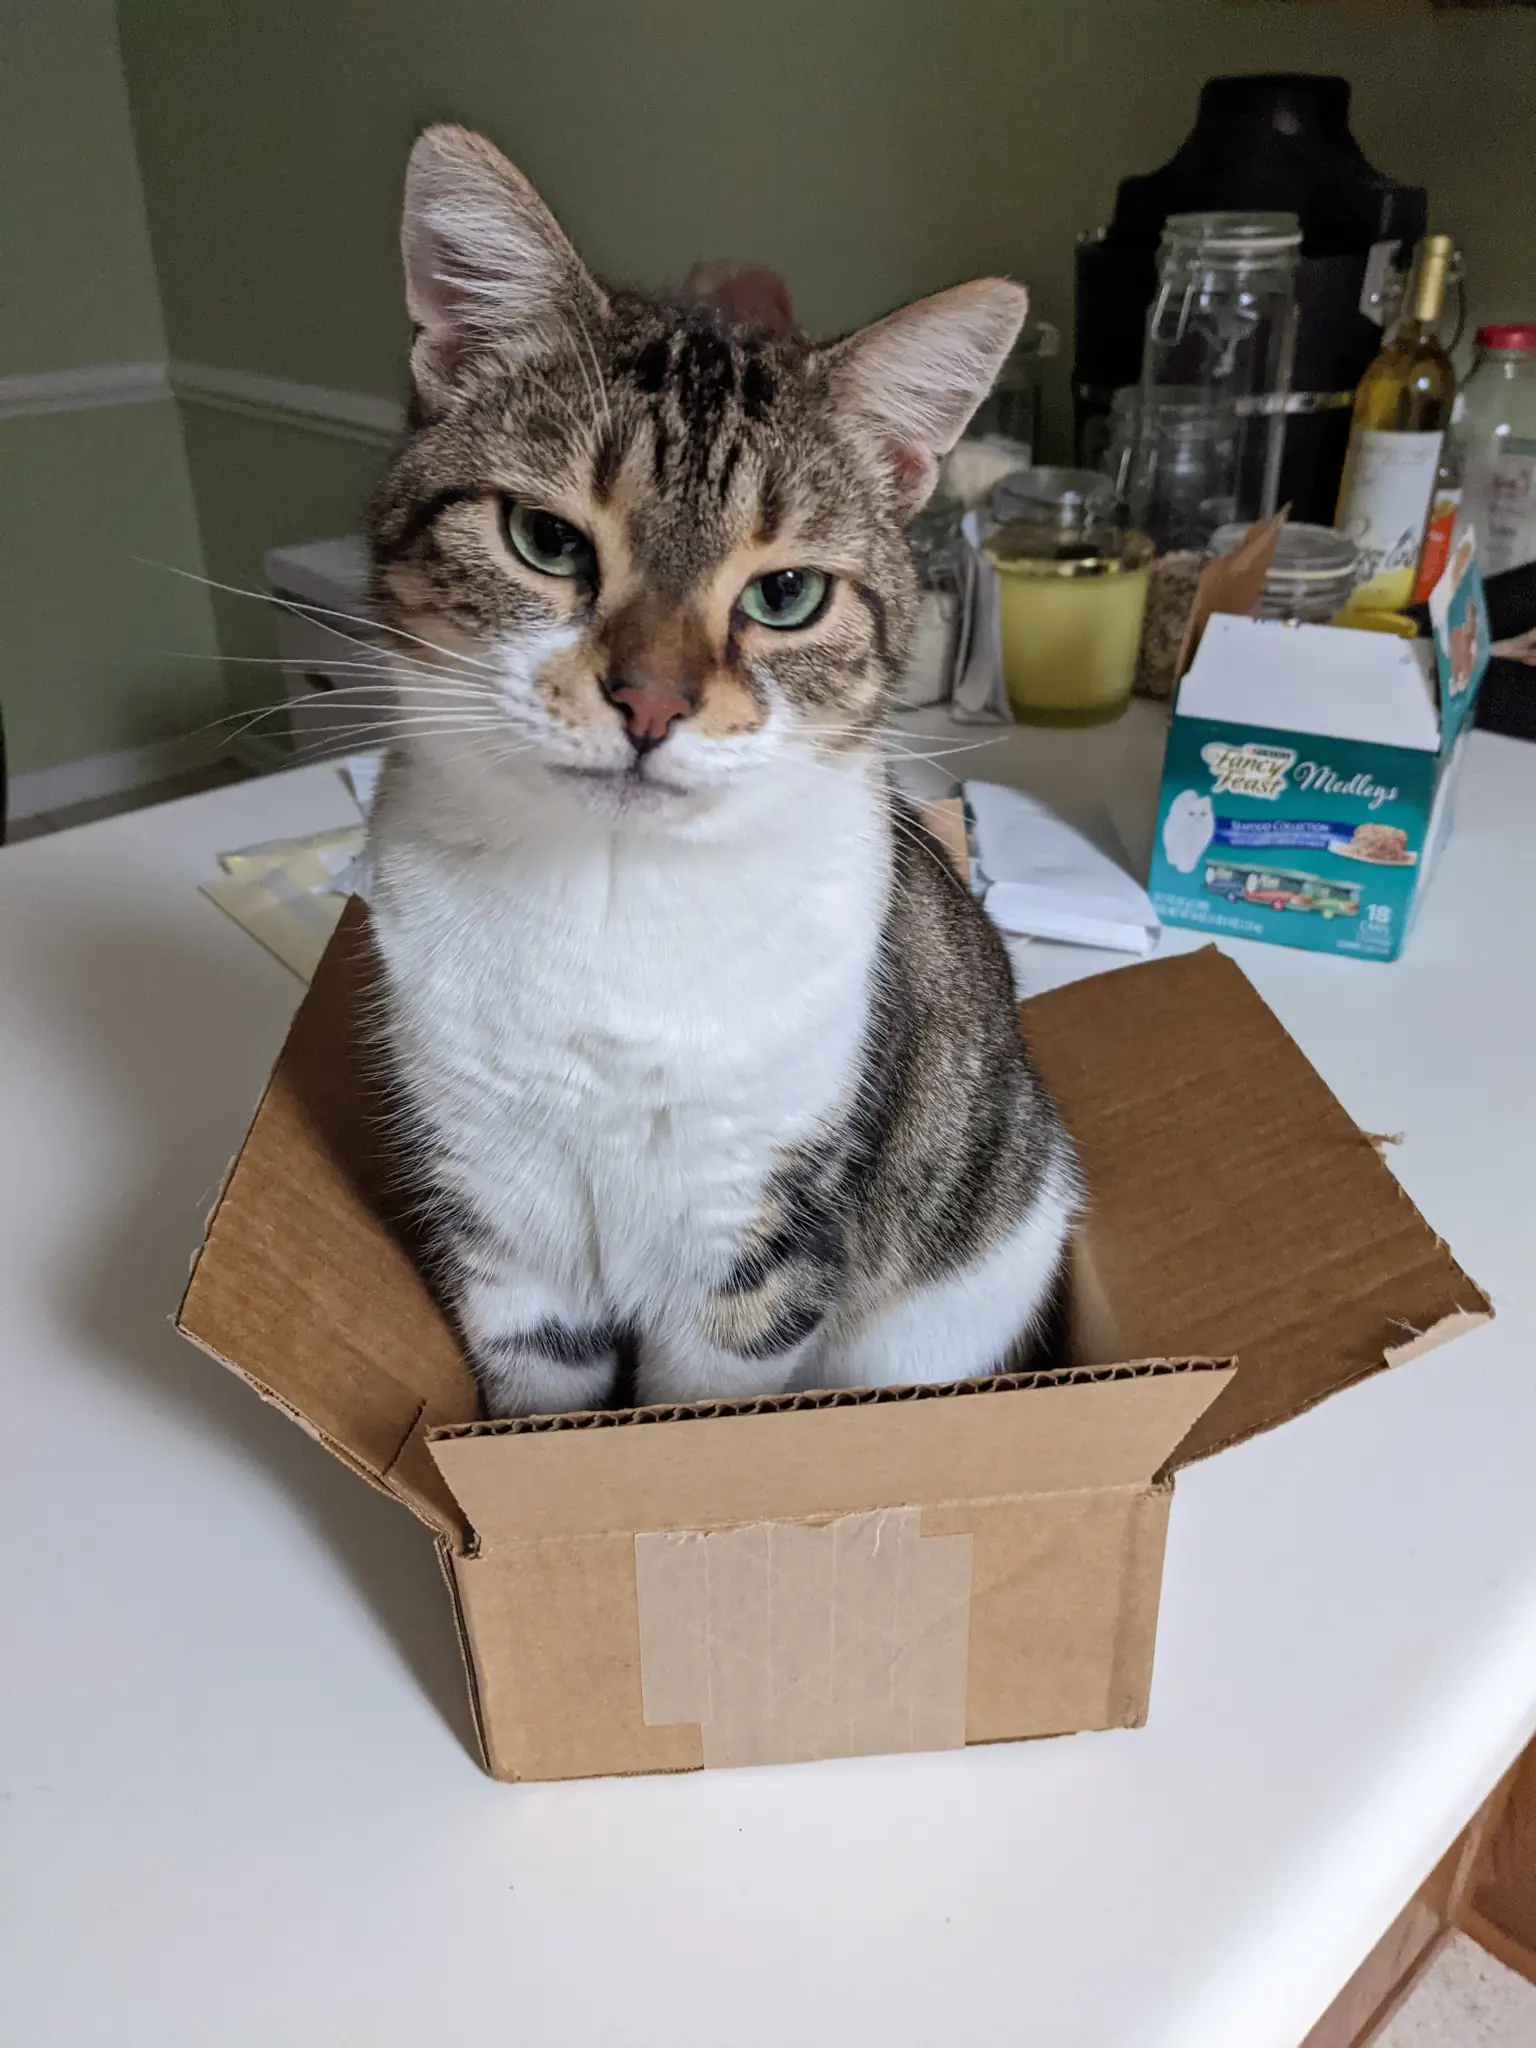 Cat sitting in a small box.